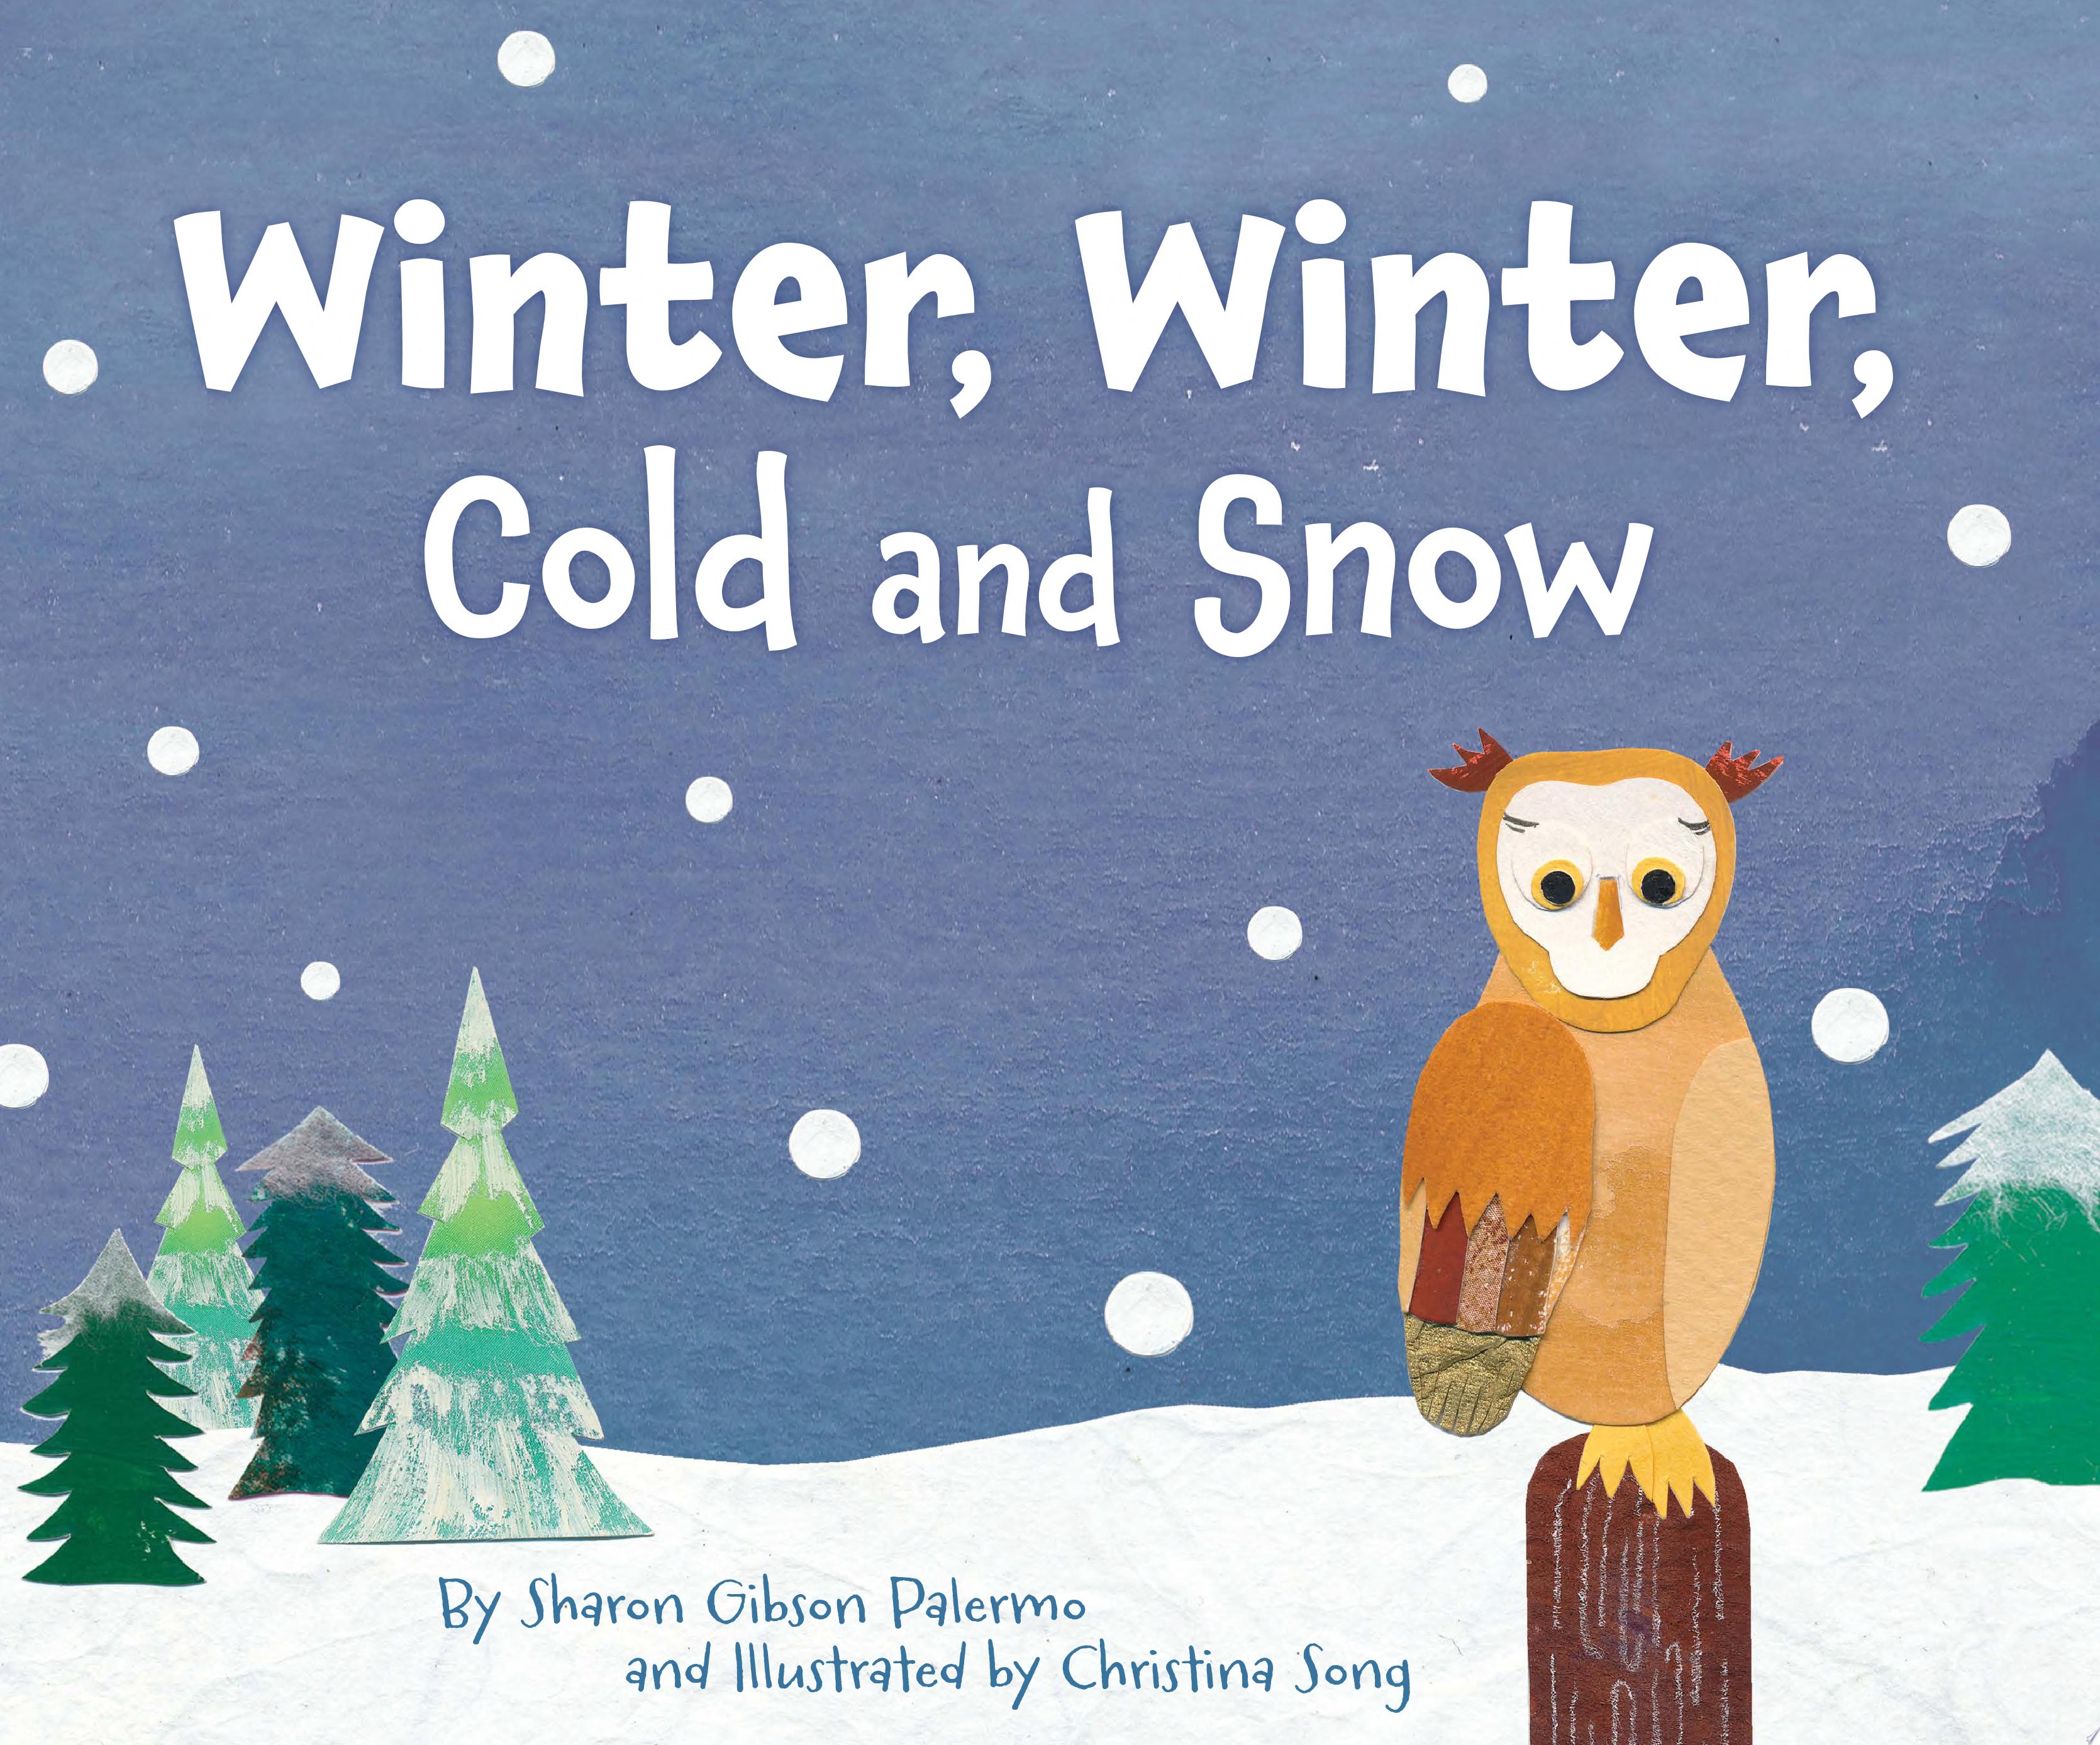 Image for "Winter, Winter, Cold and Snow"